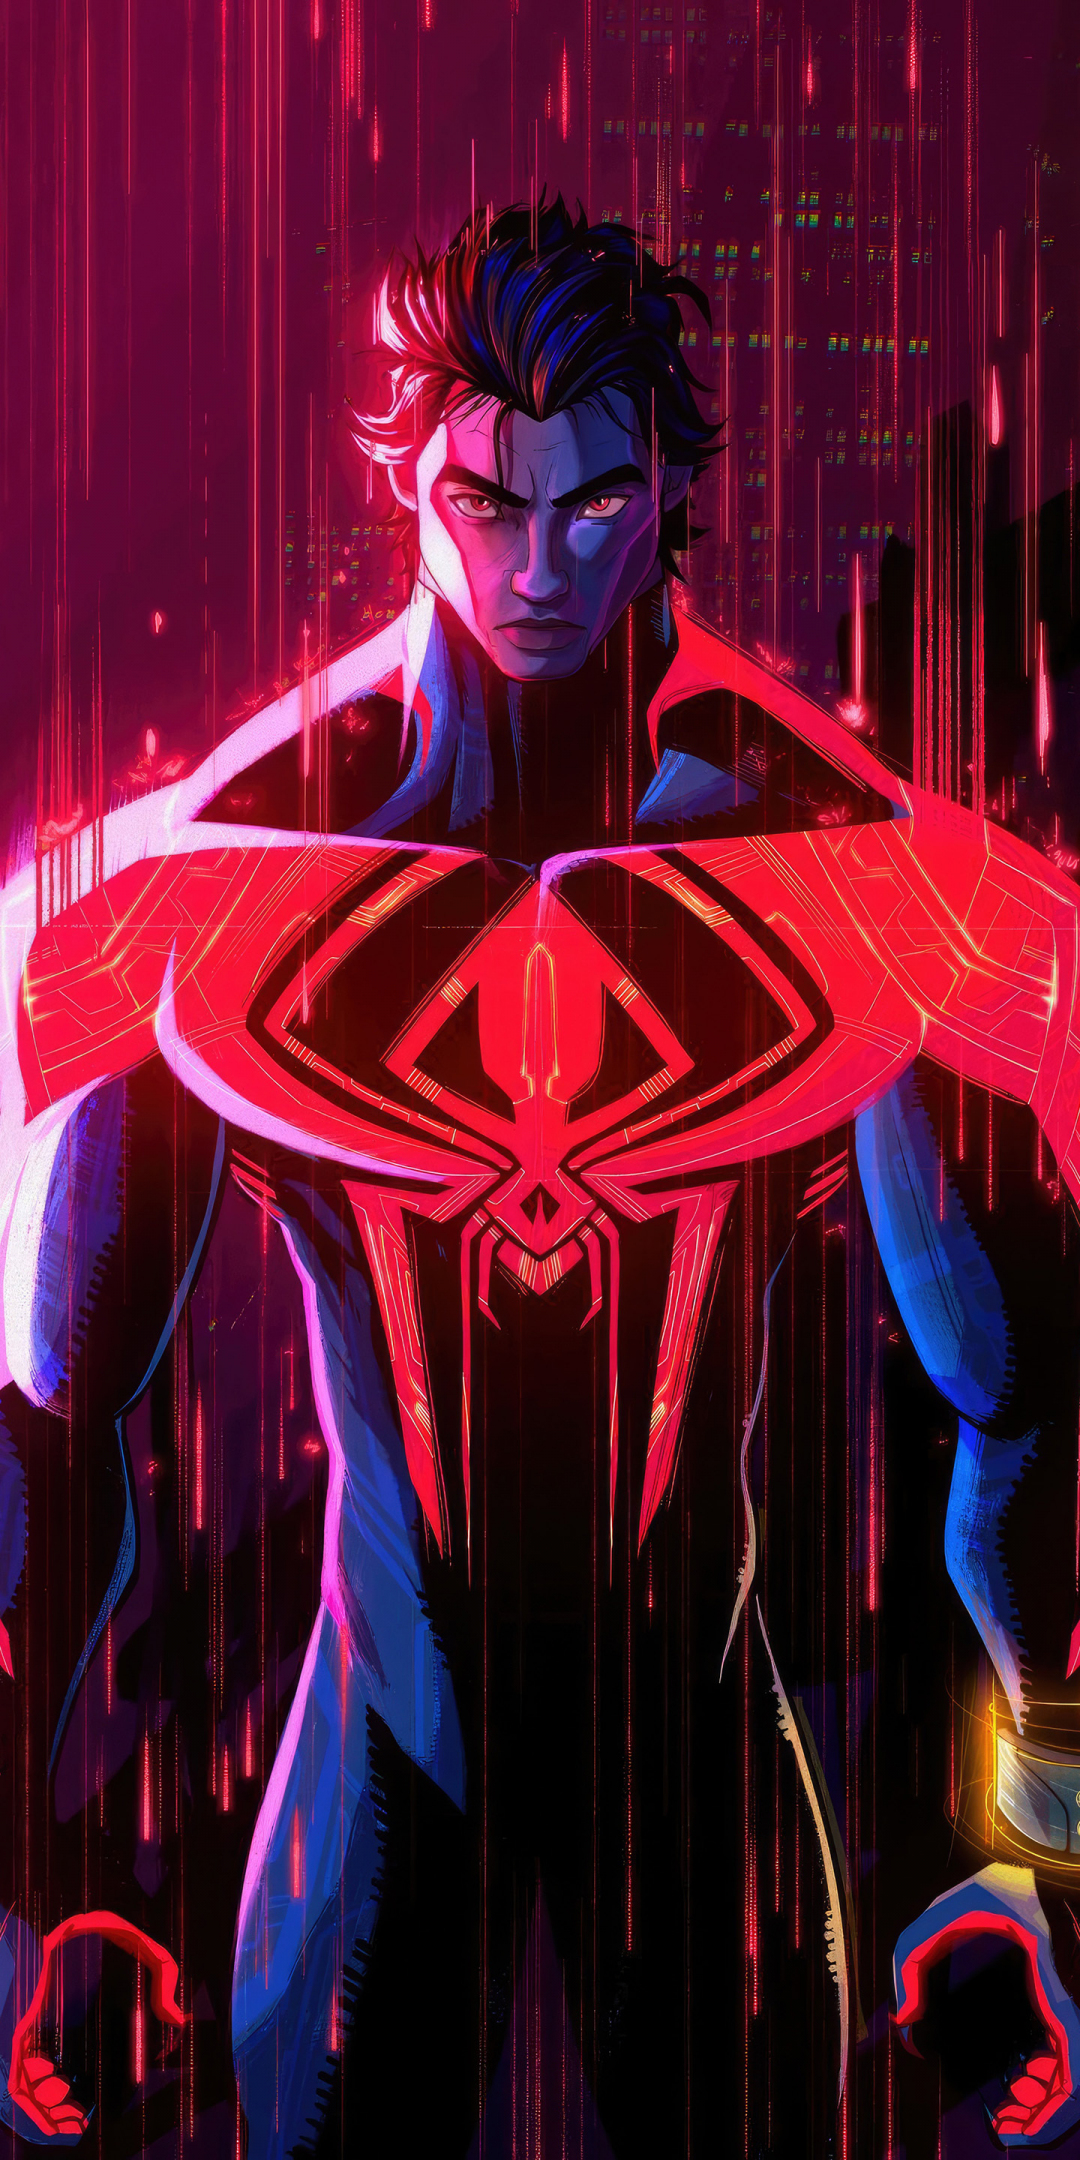 Spiderman 2099, beyond the world, with latest tech, 2023, 1080x2160 wallpaper